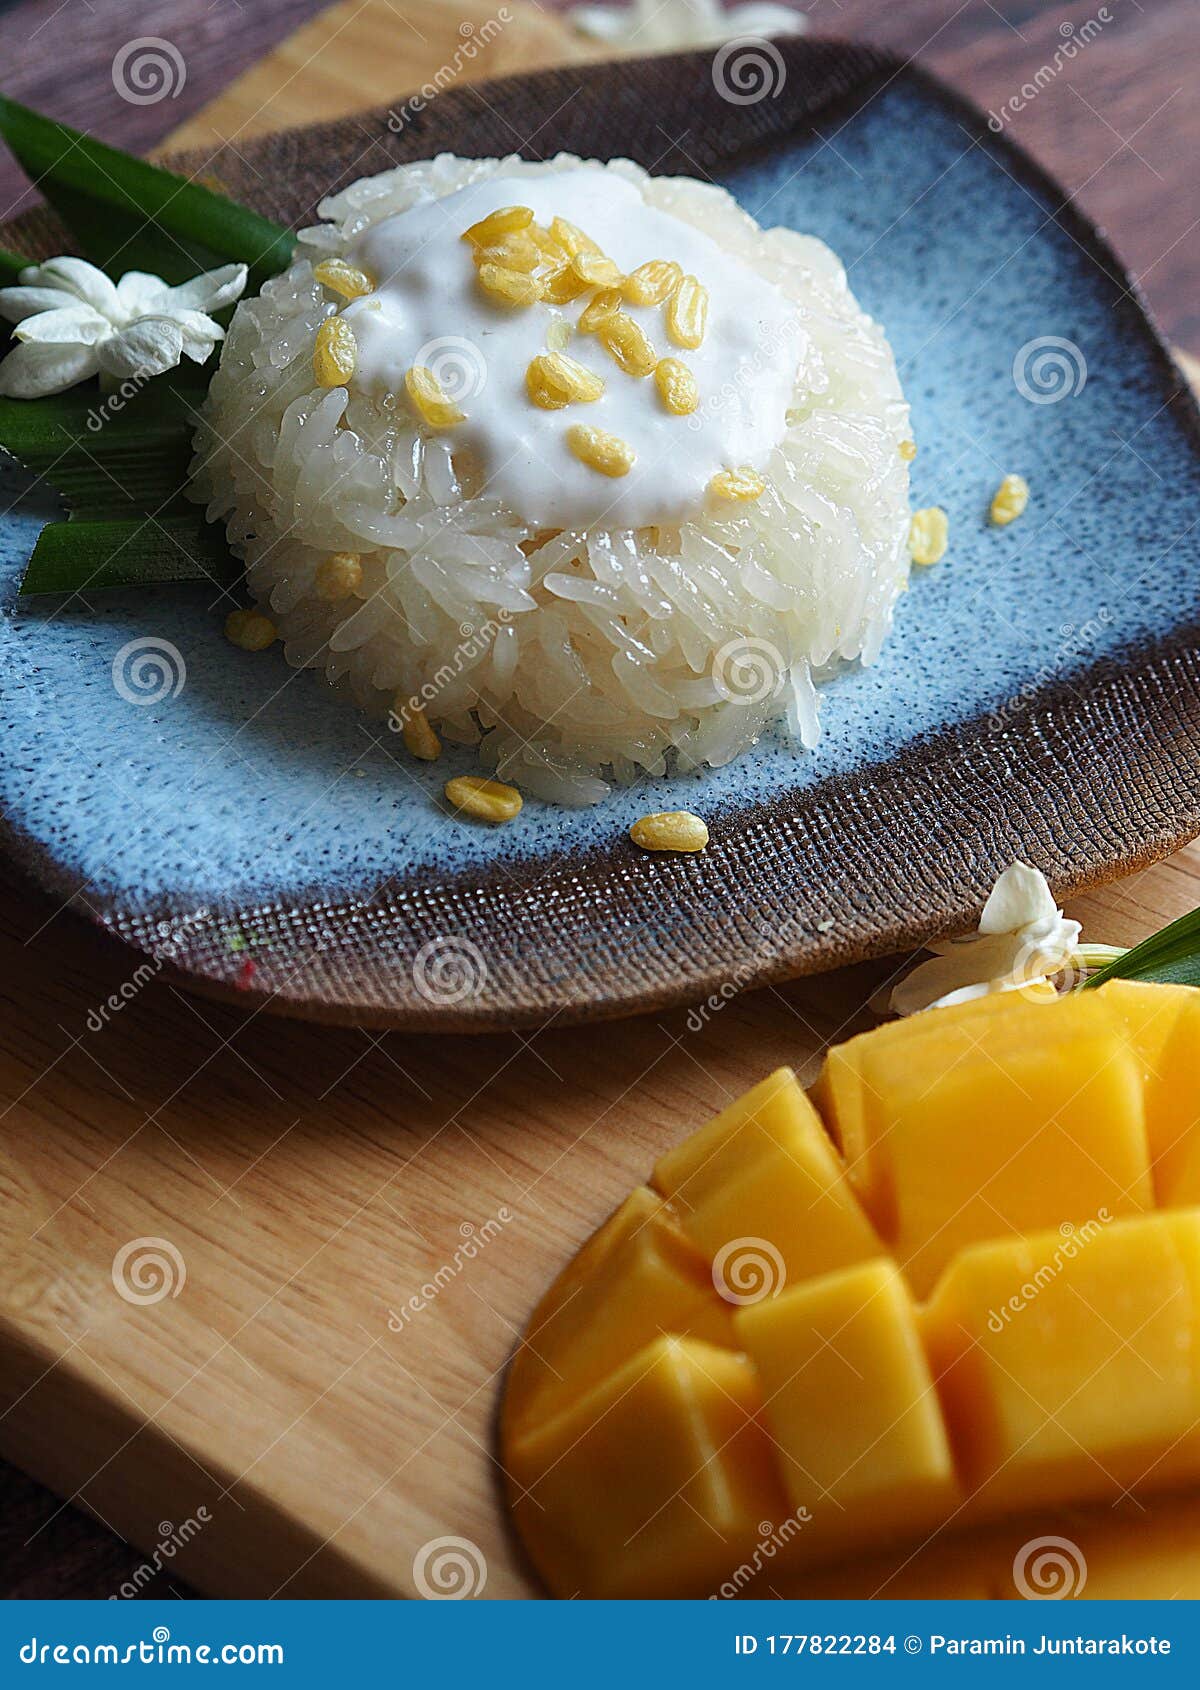 sticky rice and rip sweet mago on wood tray